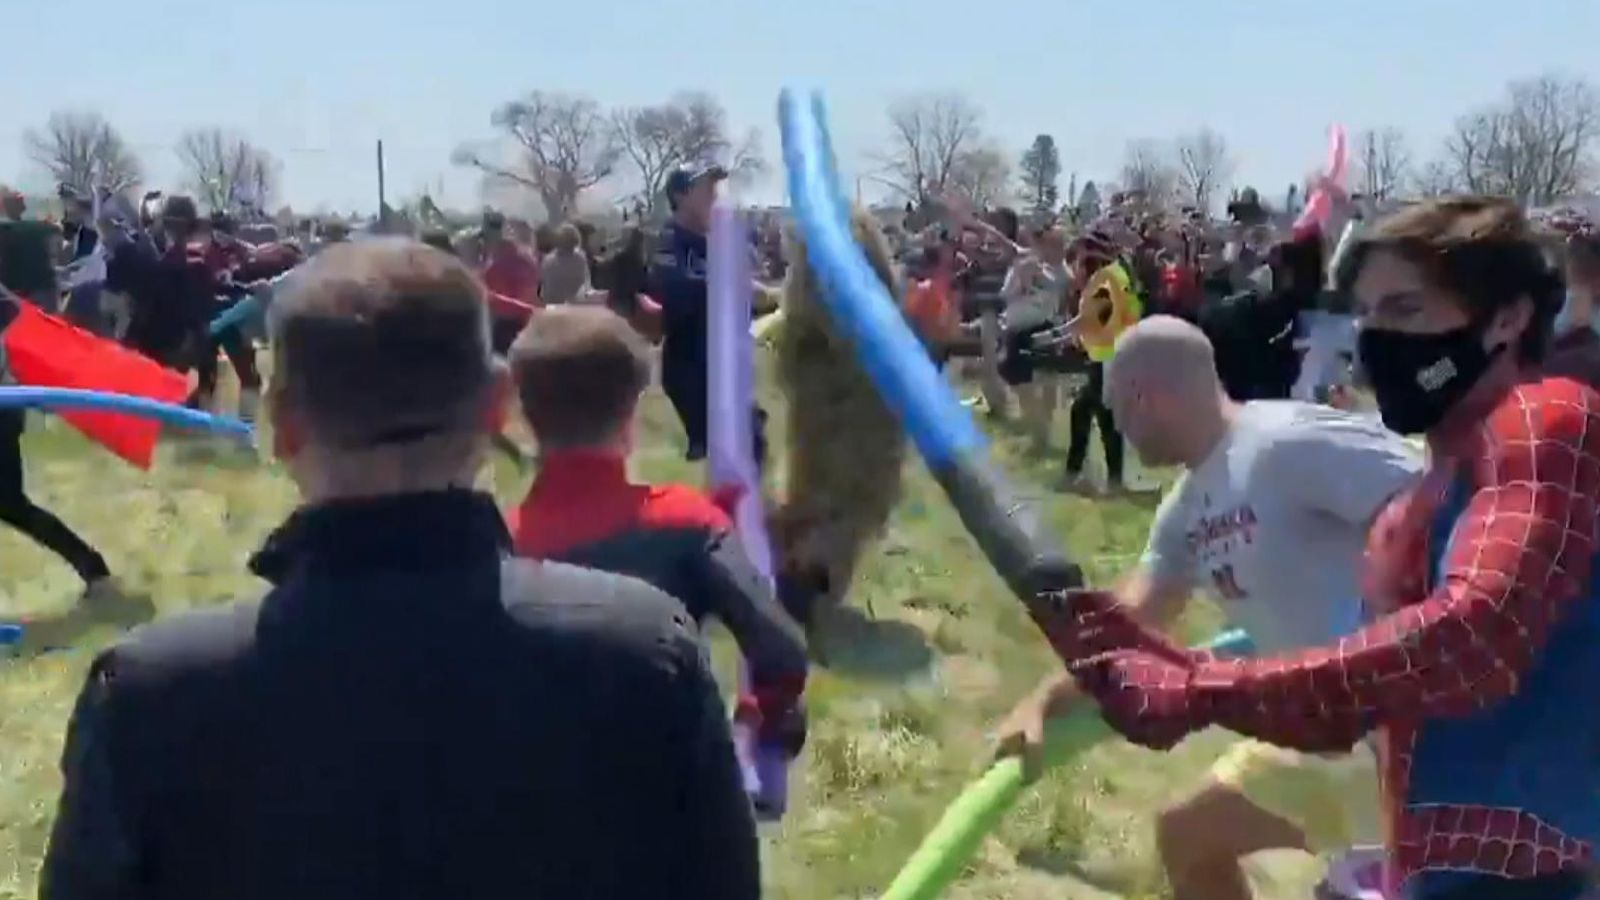 Josh fight: Spider-Men and Jedi among brawlers in viral meme contest | World News | Sky News